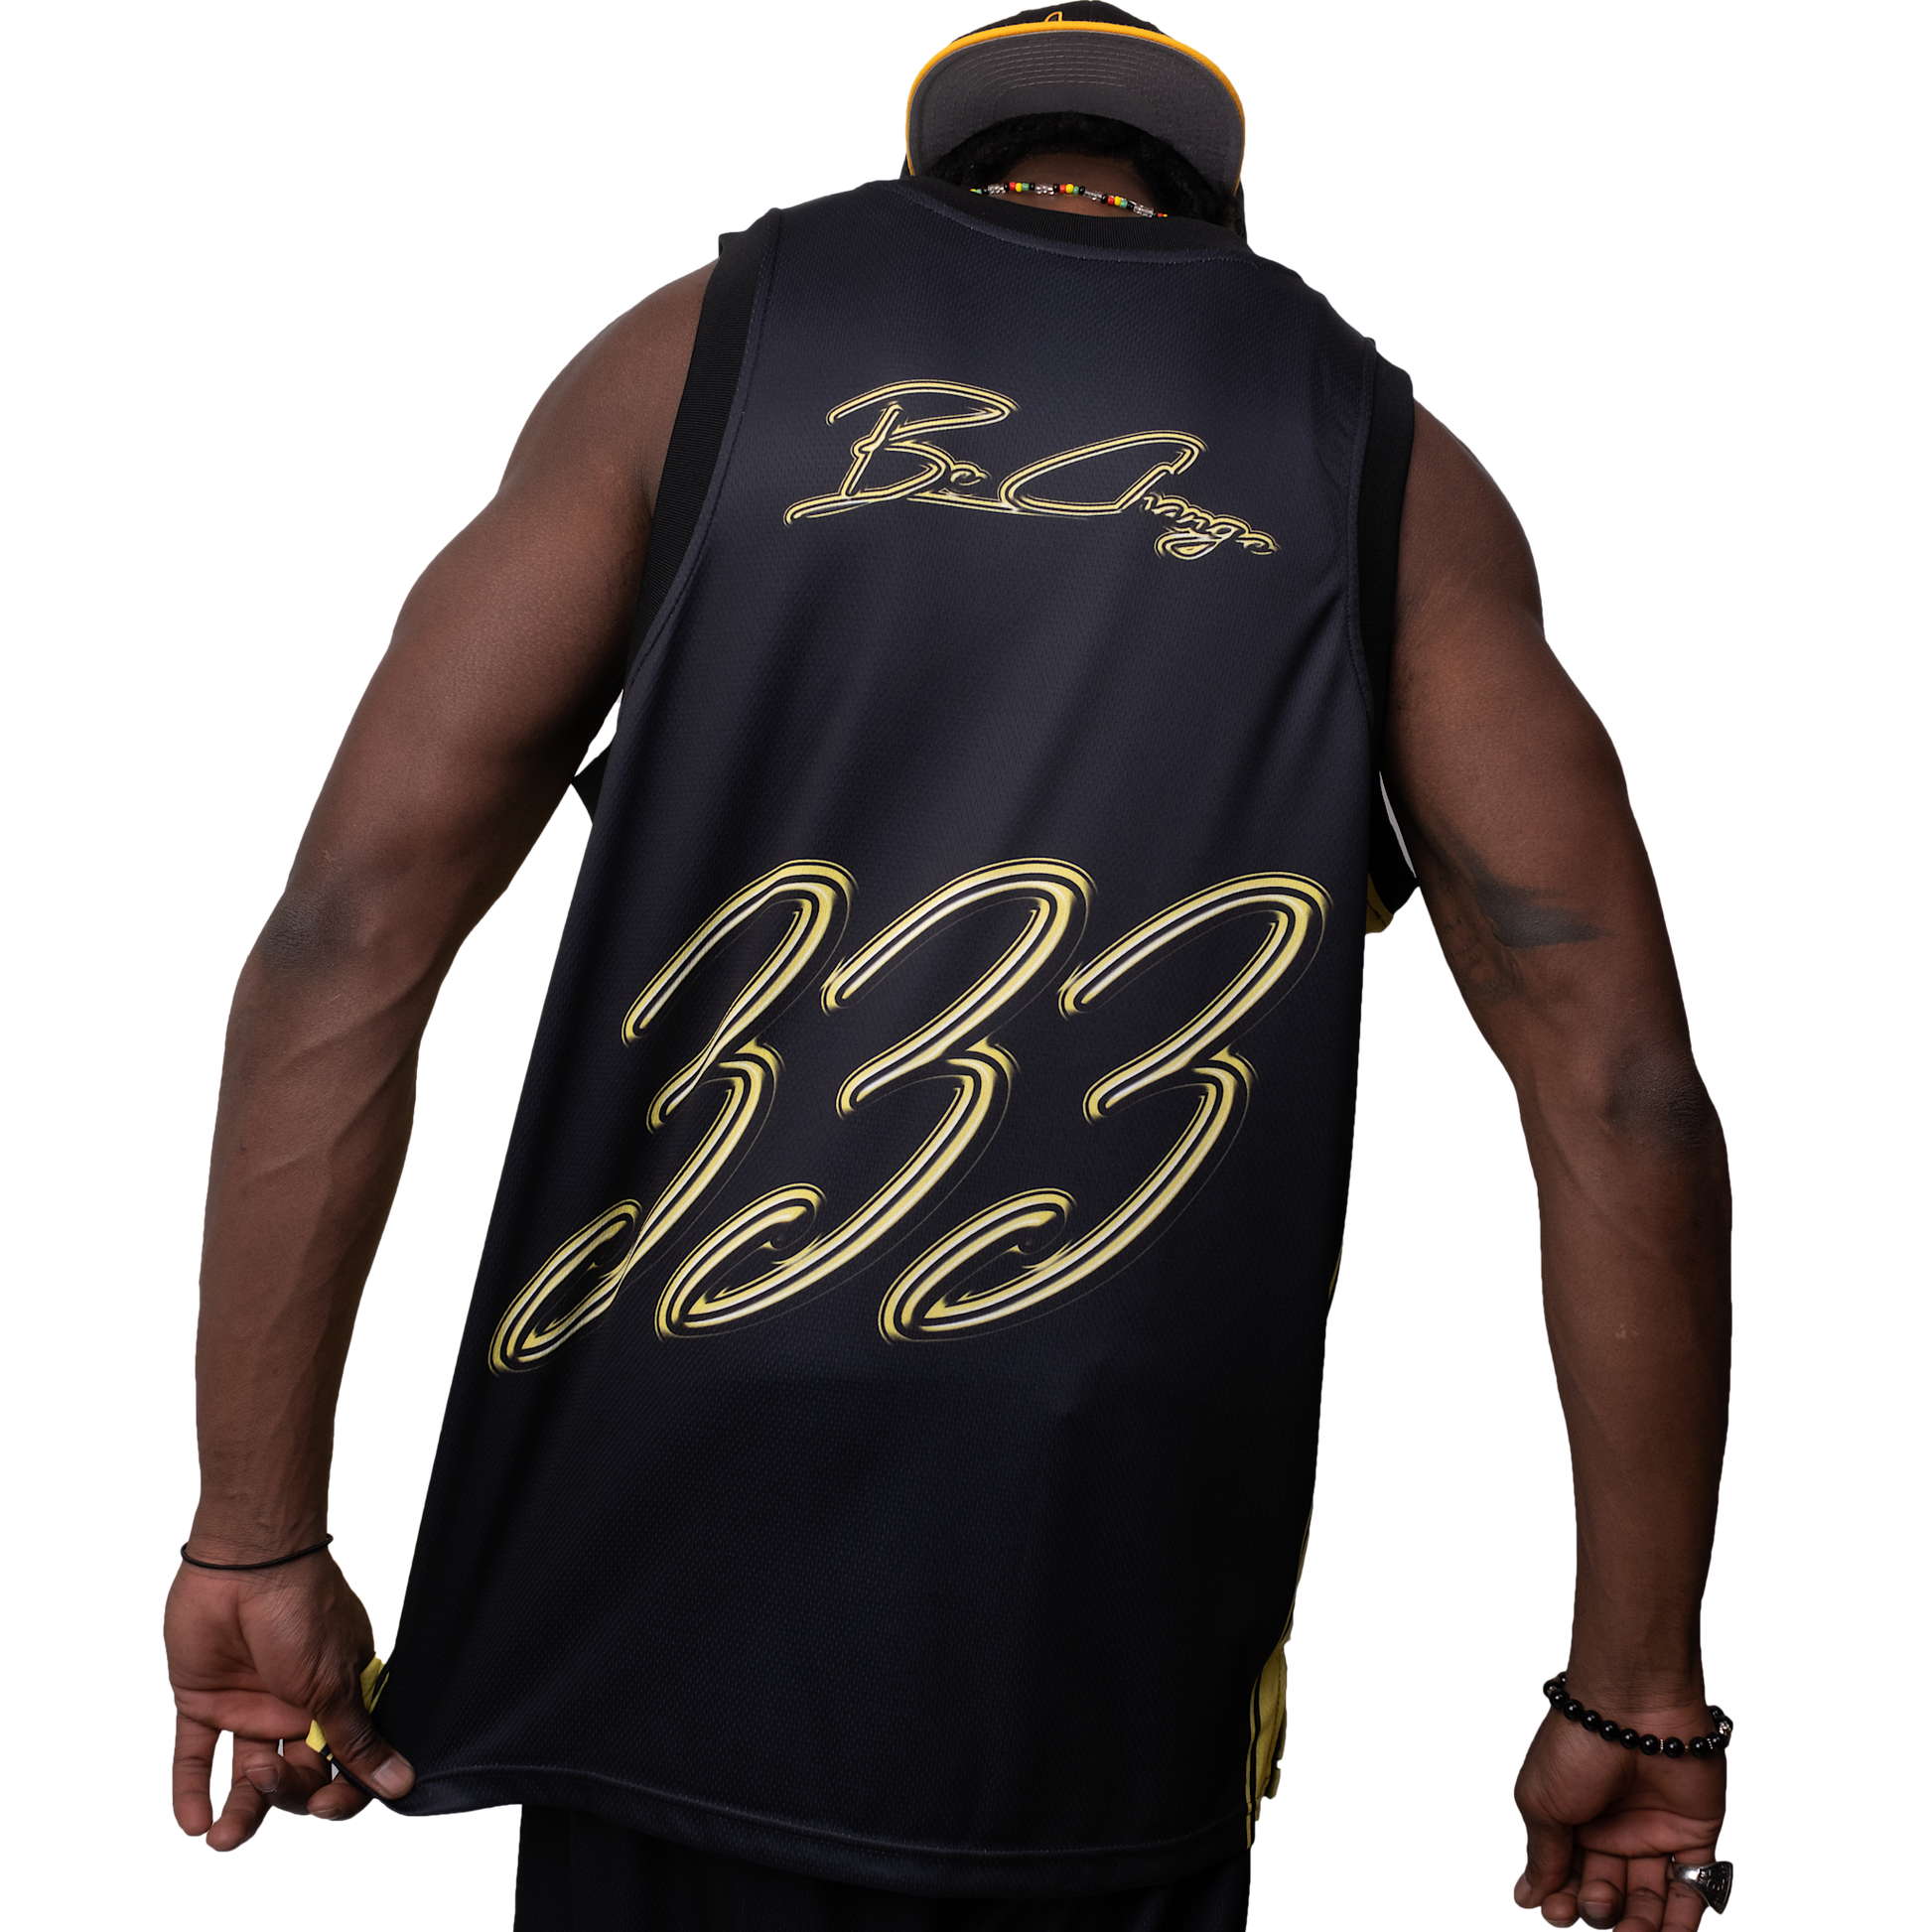 Products Basketball Jersey" BE CHANGE "-PEACE GANG